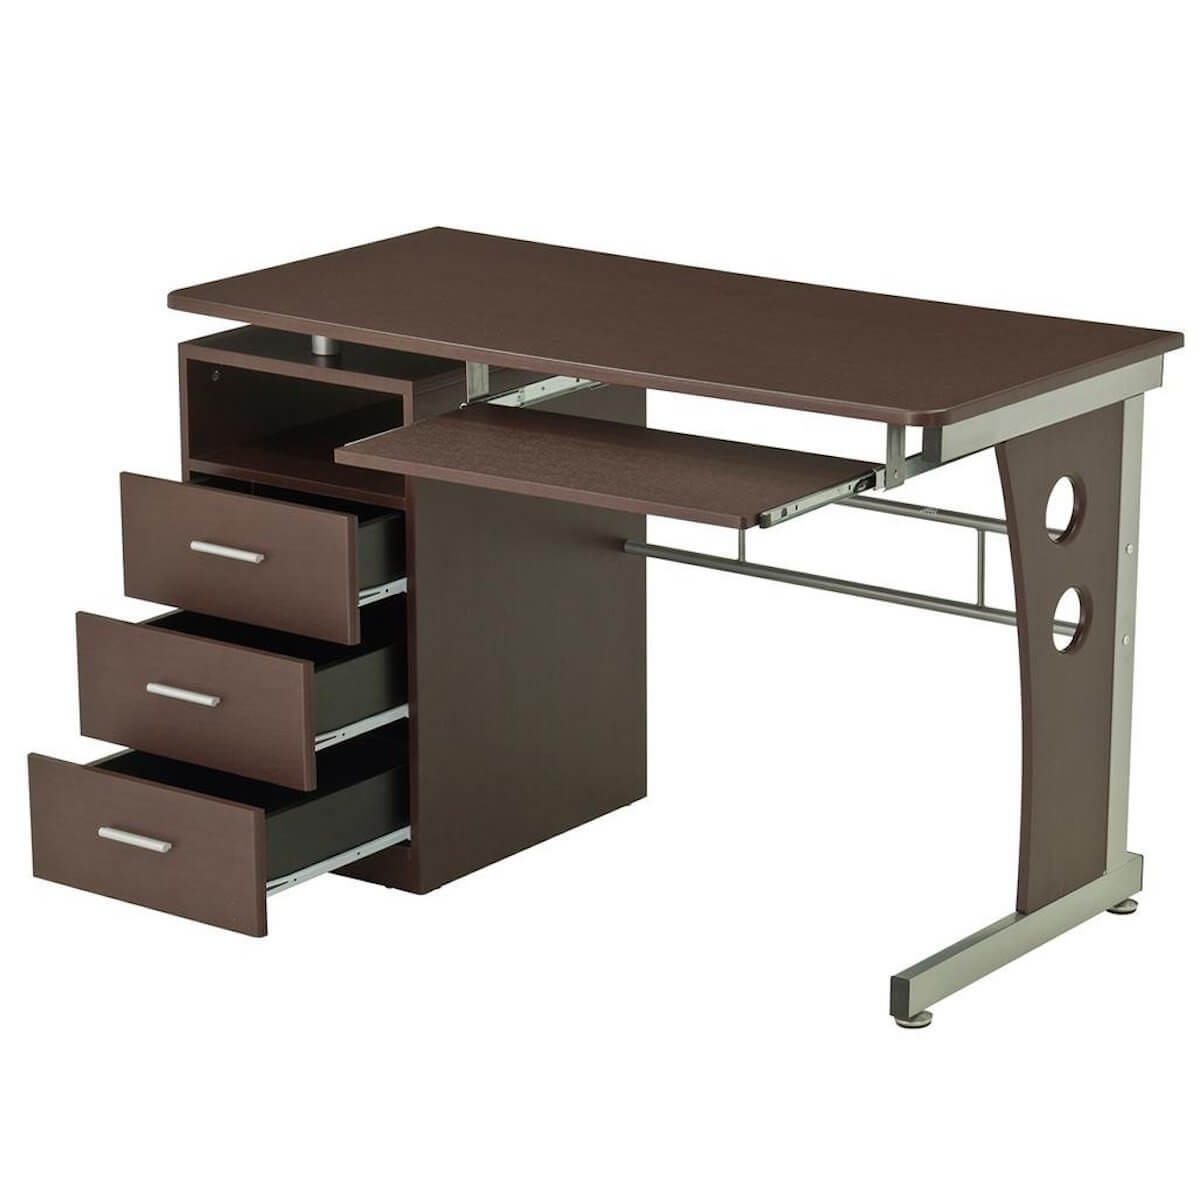 Techni Mobili Chocolate Computer Desk with Ample Storage RTA-3520-CH36 Inside #color_chocolate